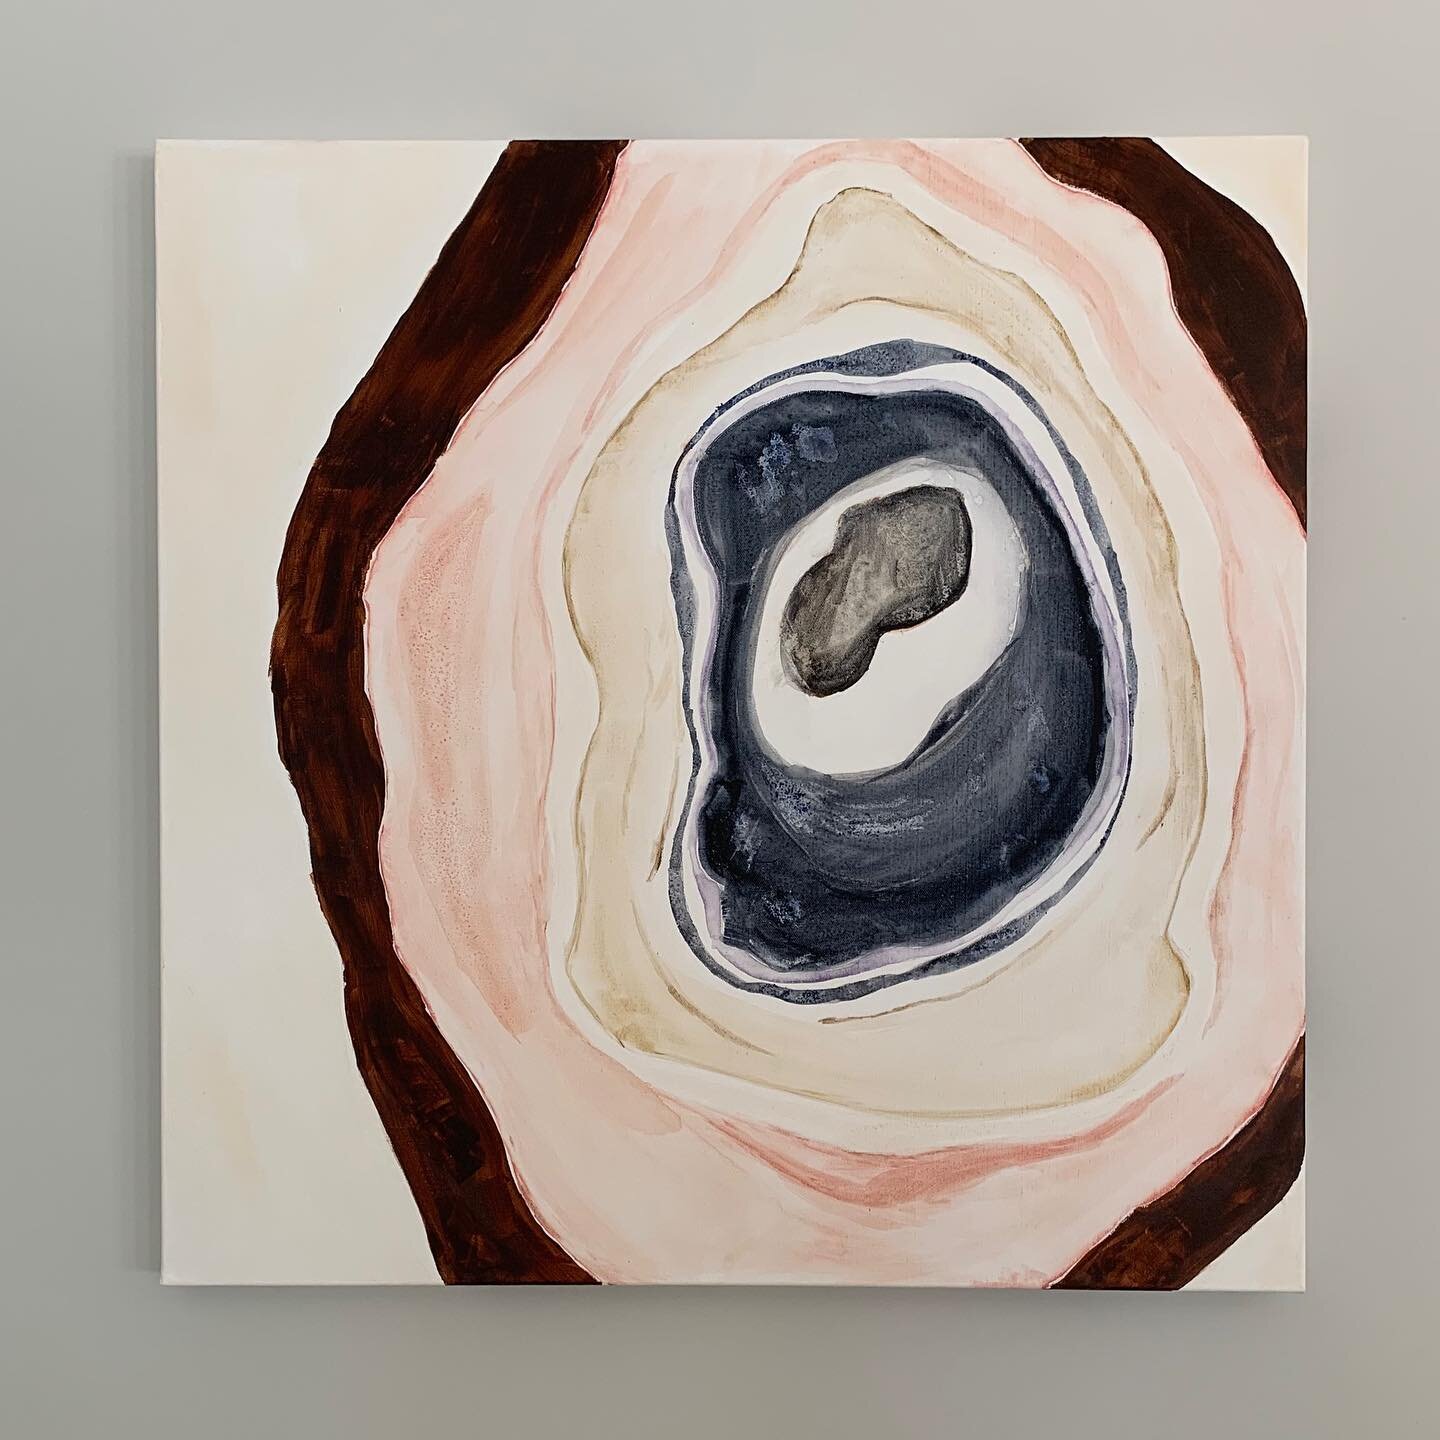 Just a little abstract work, do you see an oyster or geode?